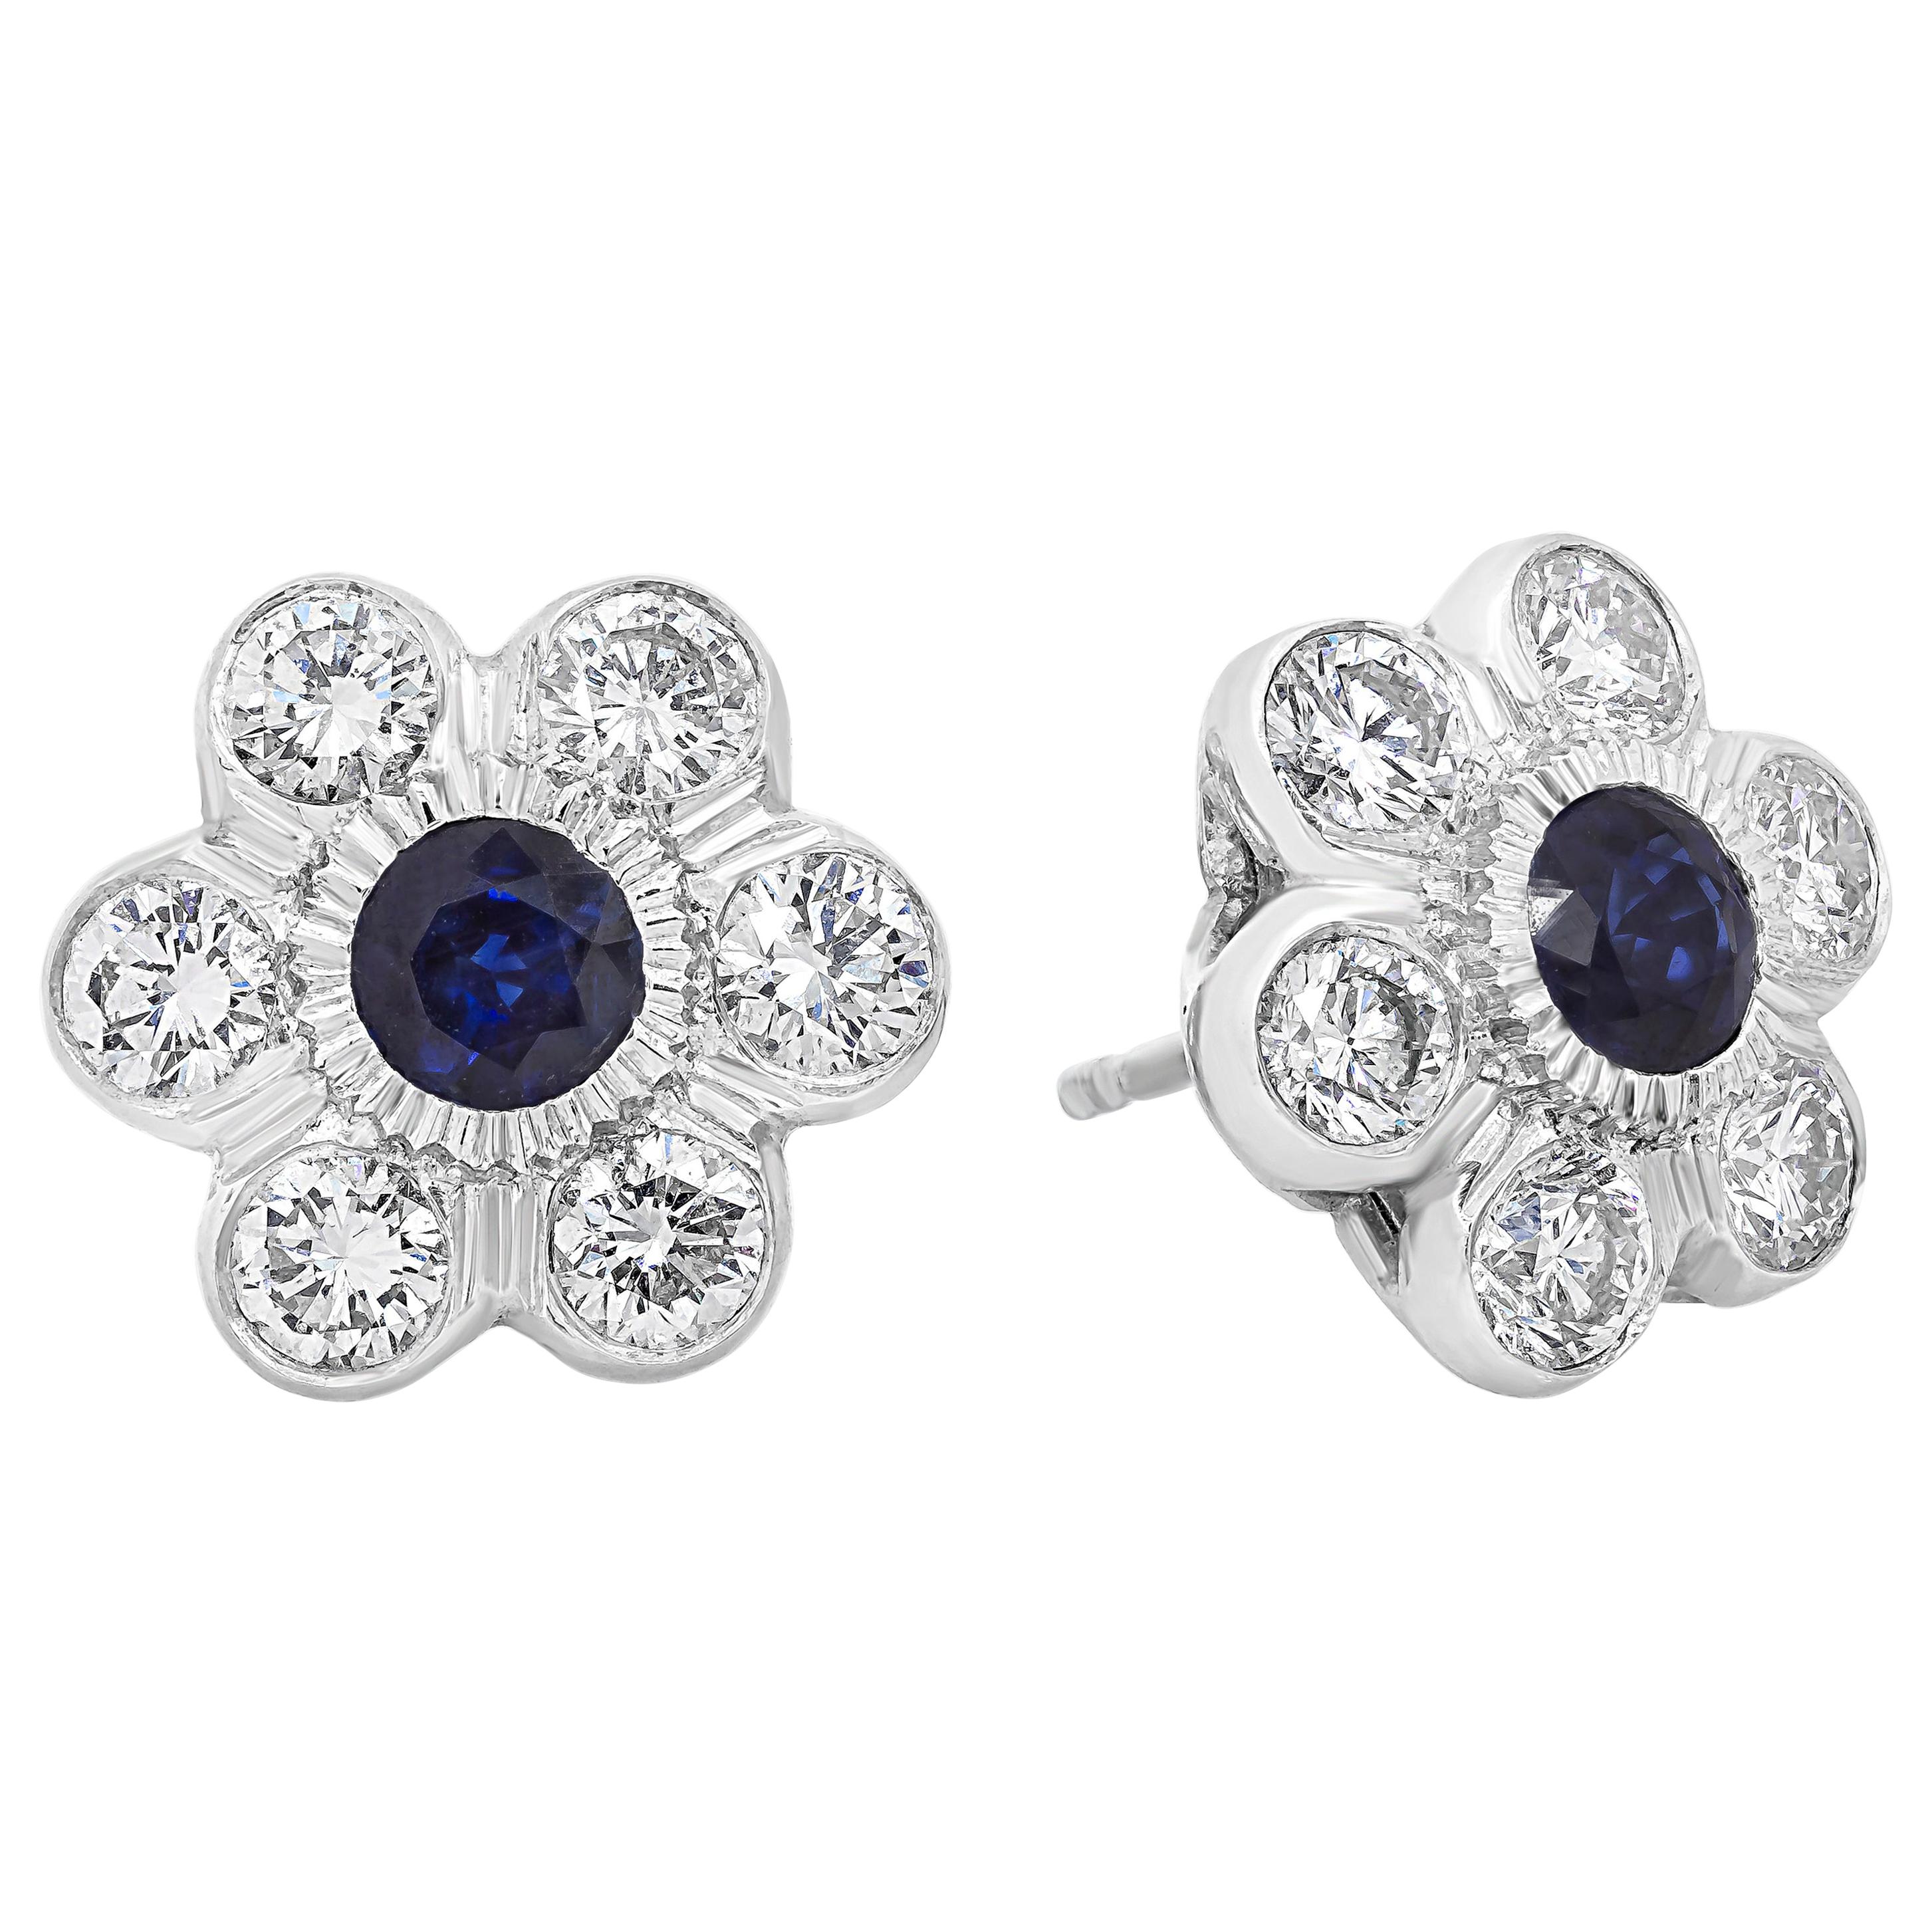 Roman Malakov 1.33 Carats Total Round Blue Sapphire and Diamond Stud Earrings For Sale